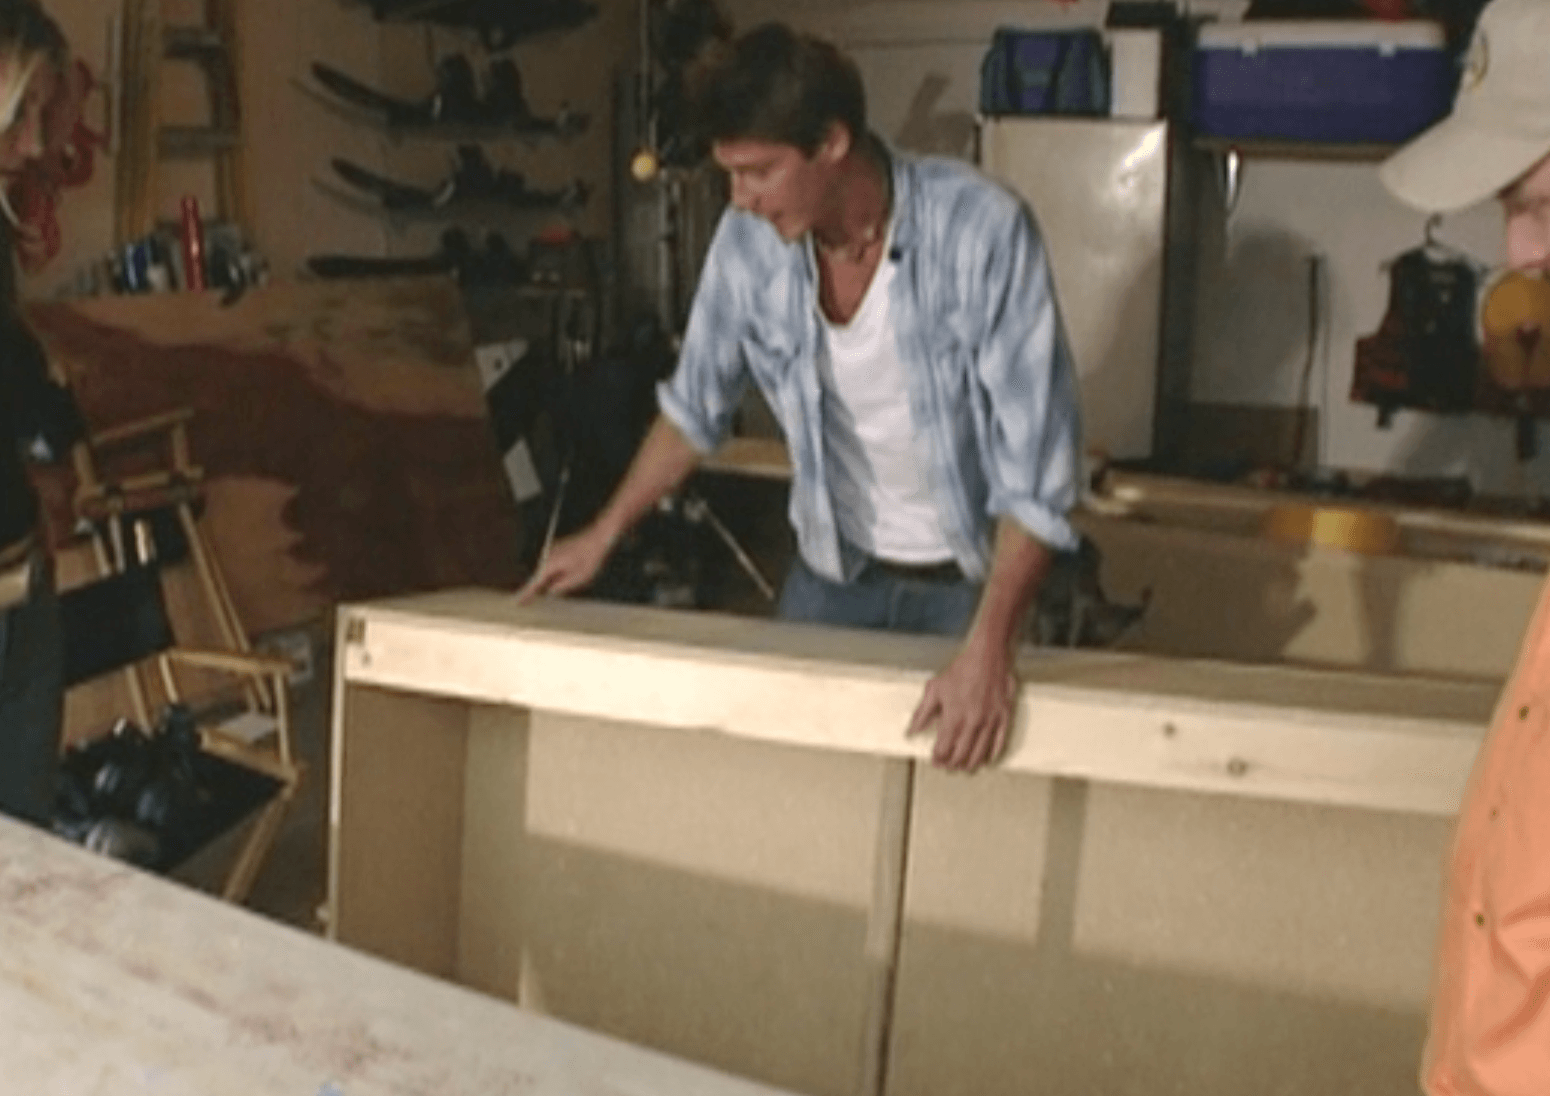 Ty Pennington on 'Trading Spaces'.